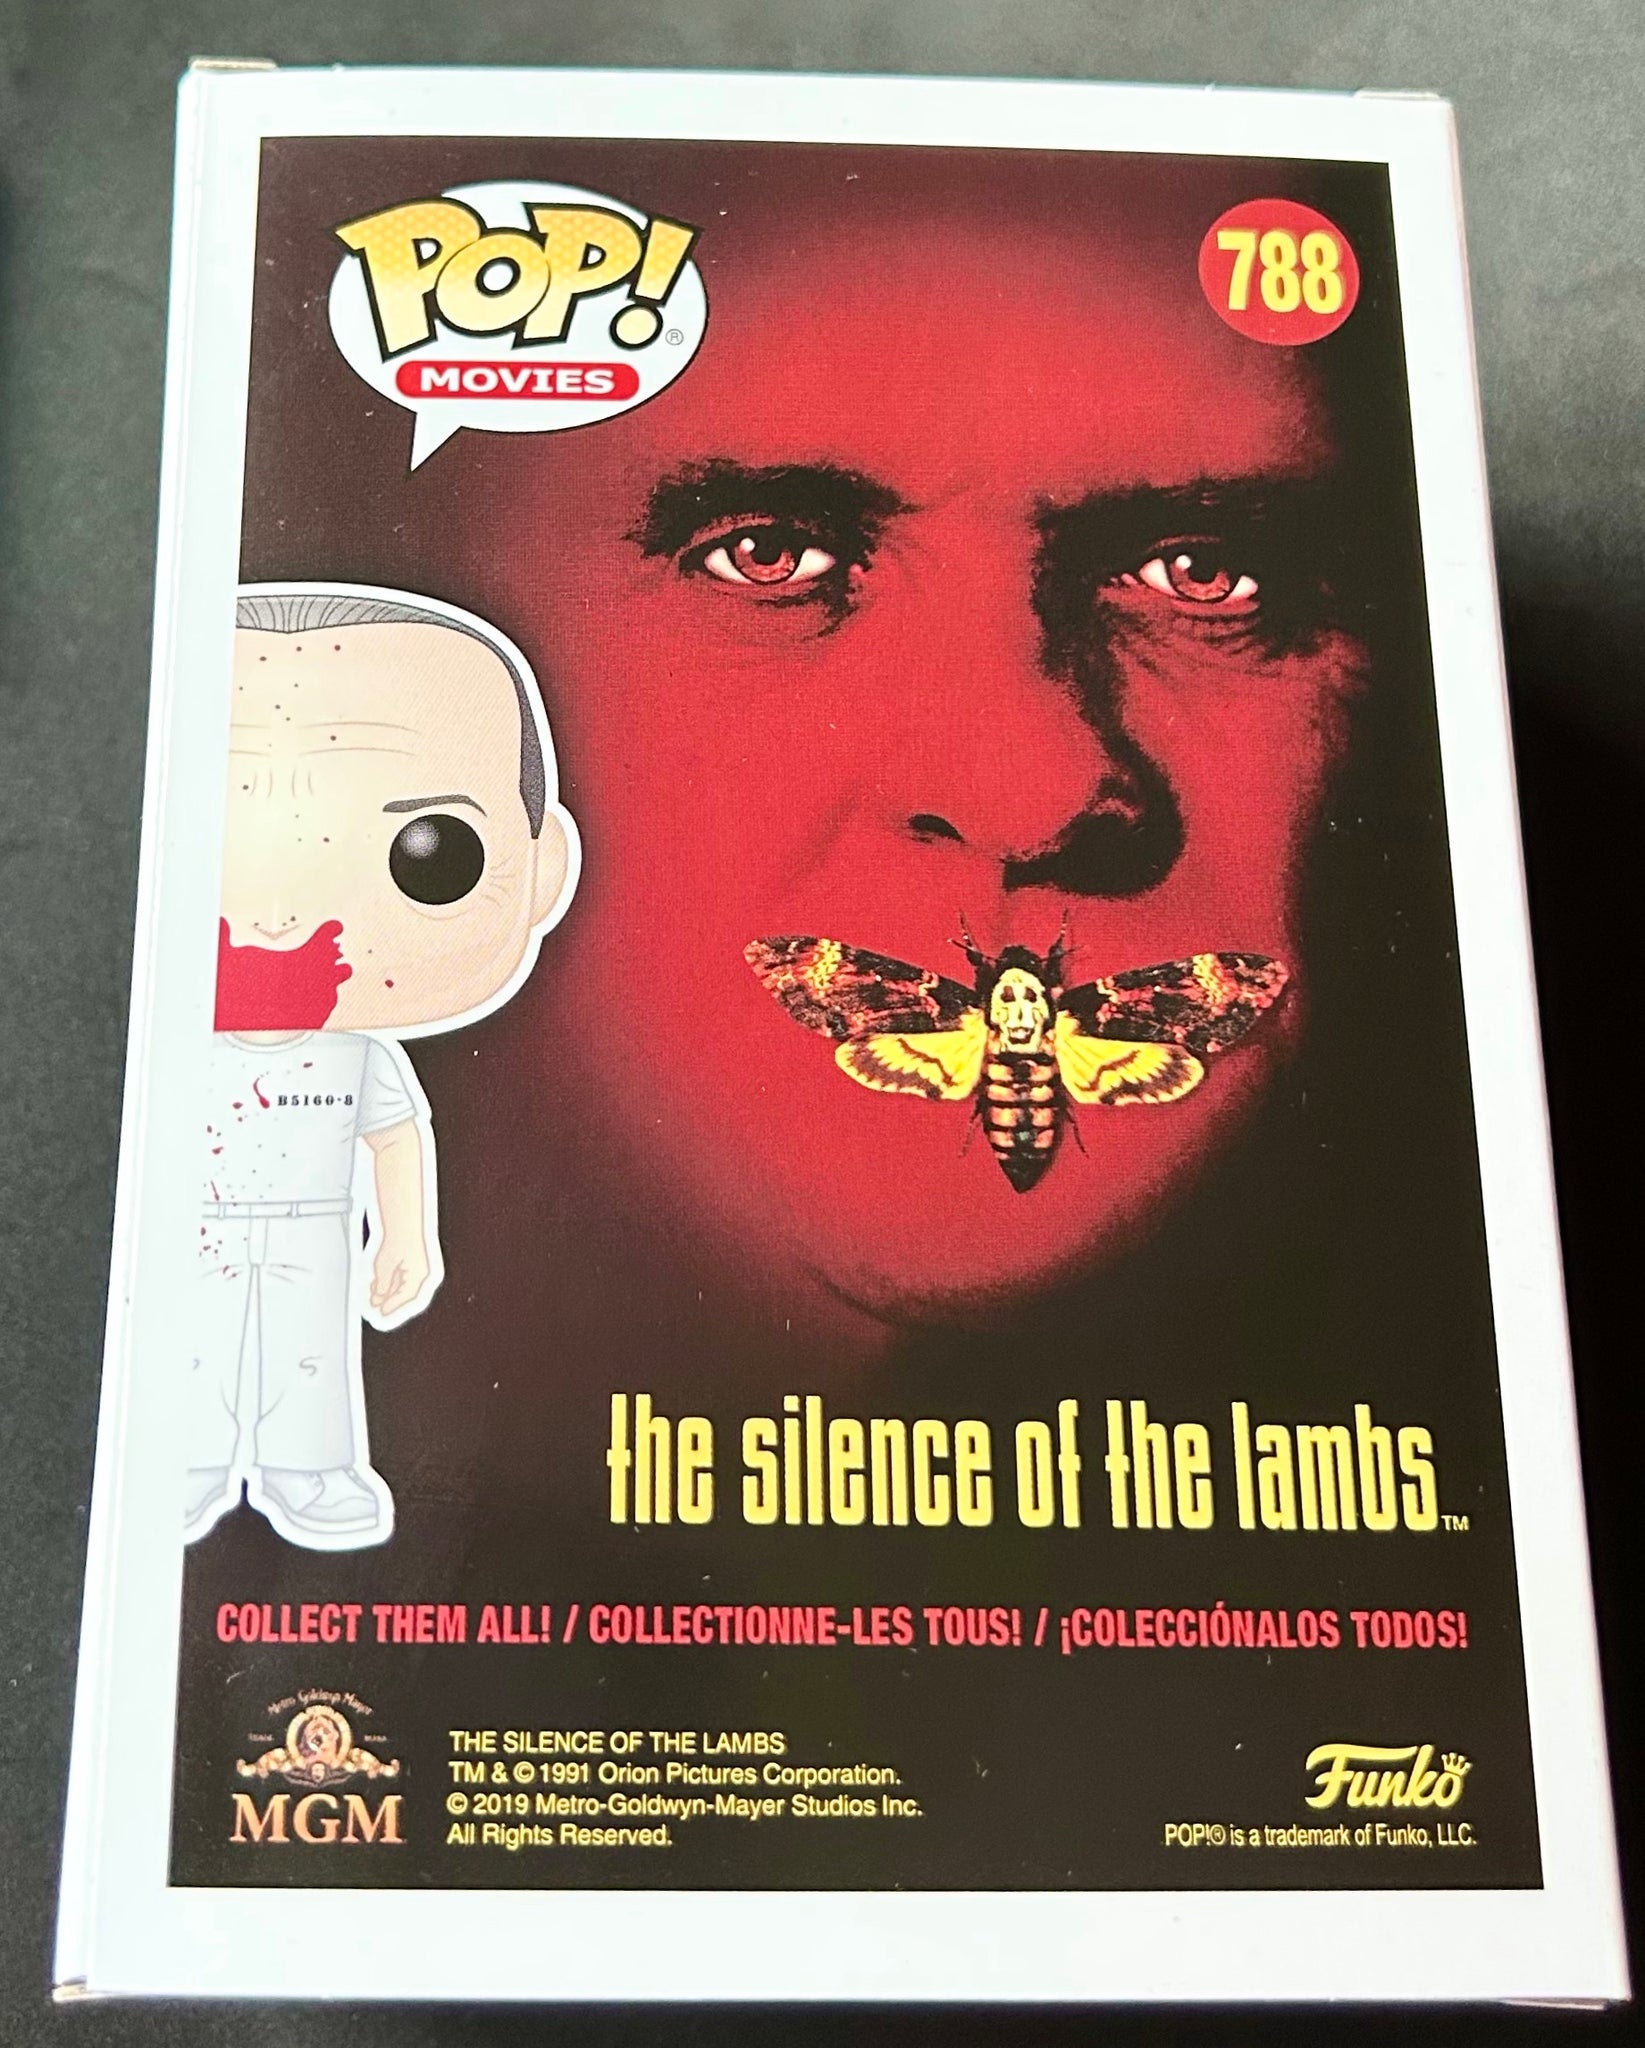 The Silence of the Lambs Hannibal Lecter (Bloody Version) 788 Funko POP!